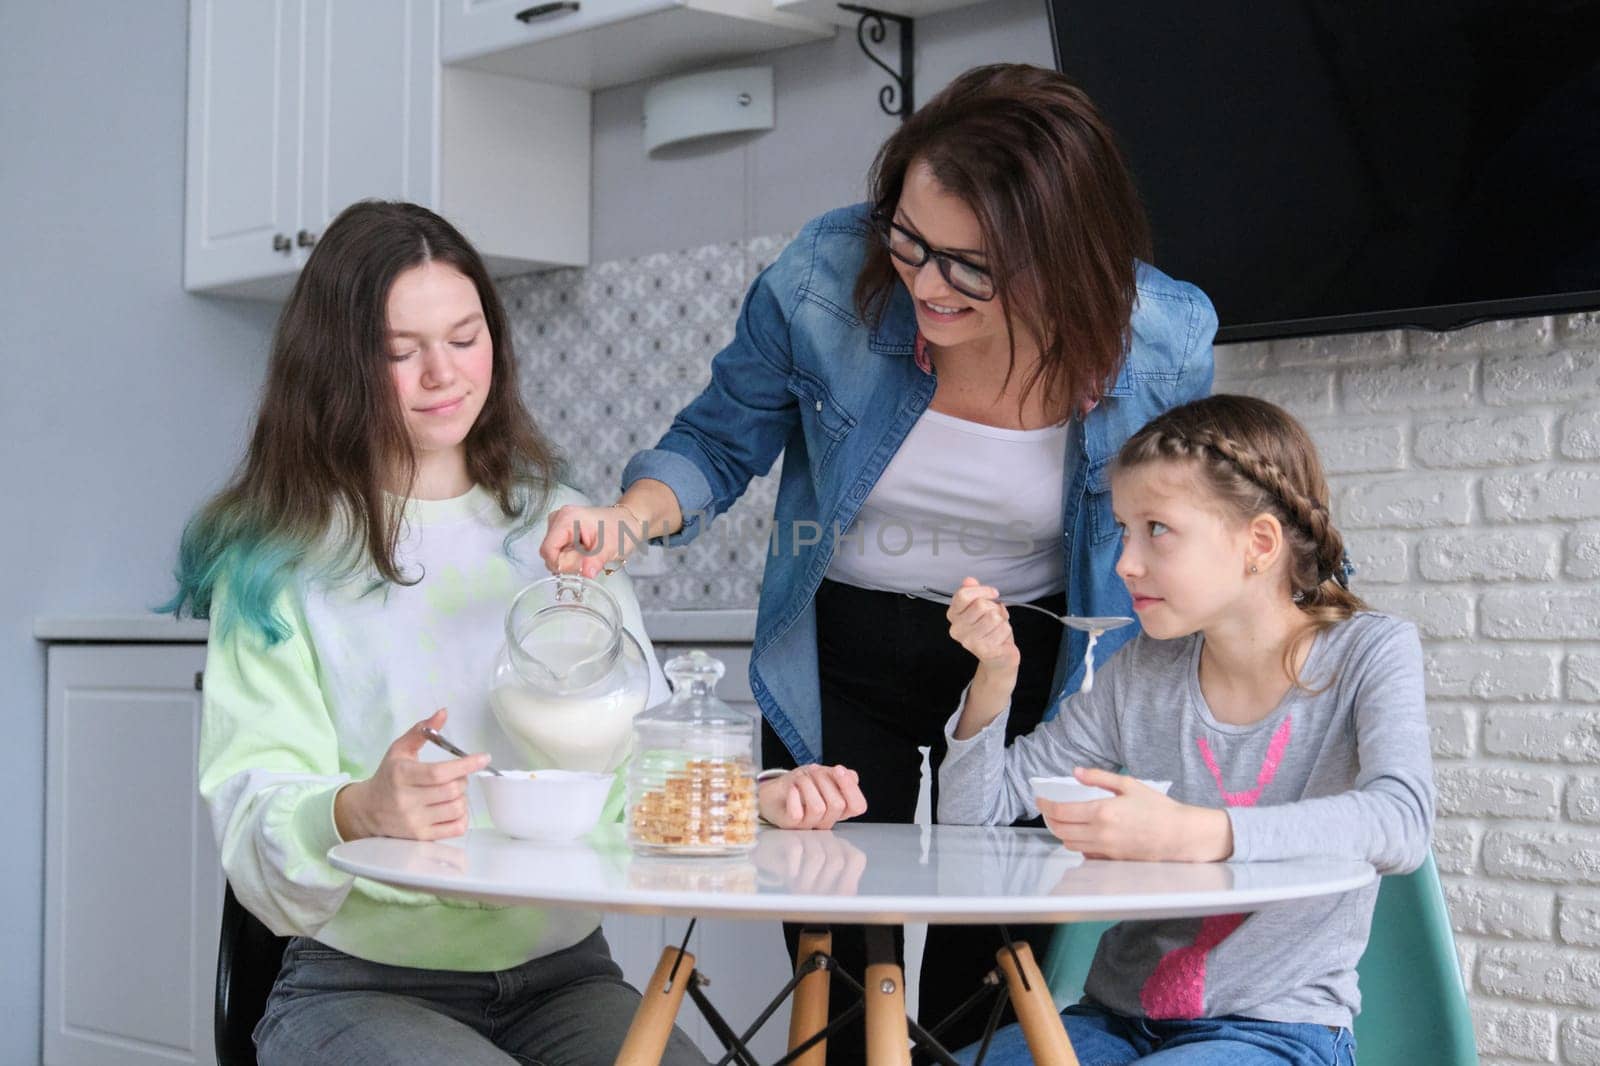 Children with mother eating at home in kitchen, two girls sitting at table with plates of corn flakes and milk. Family, eating, communication, health concept.